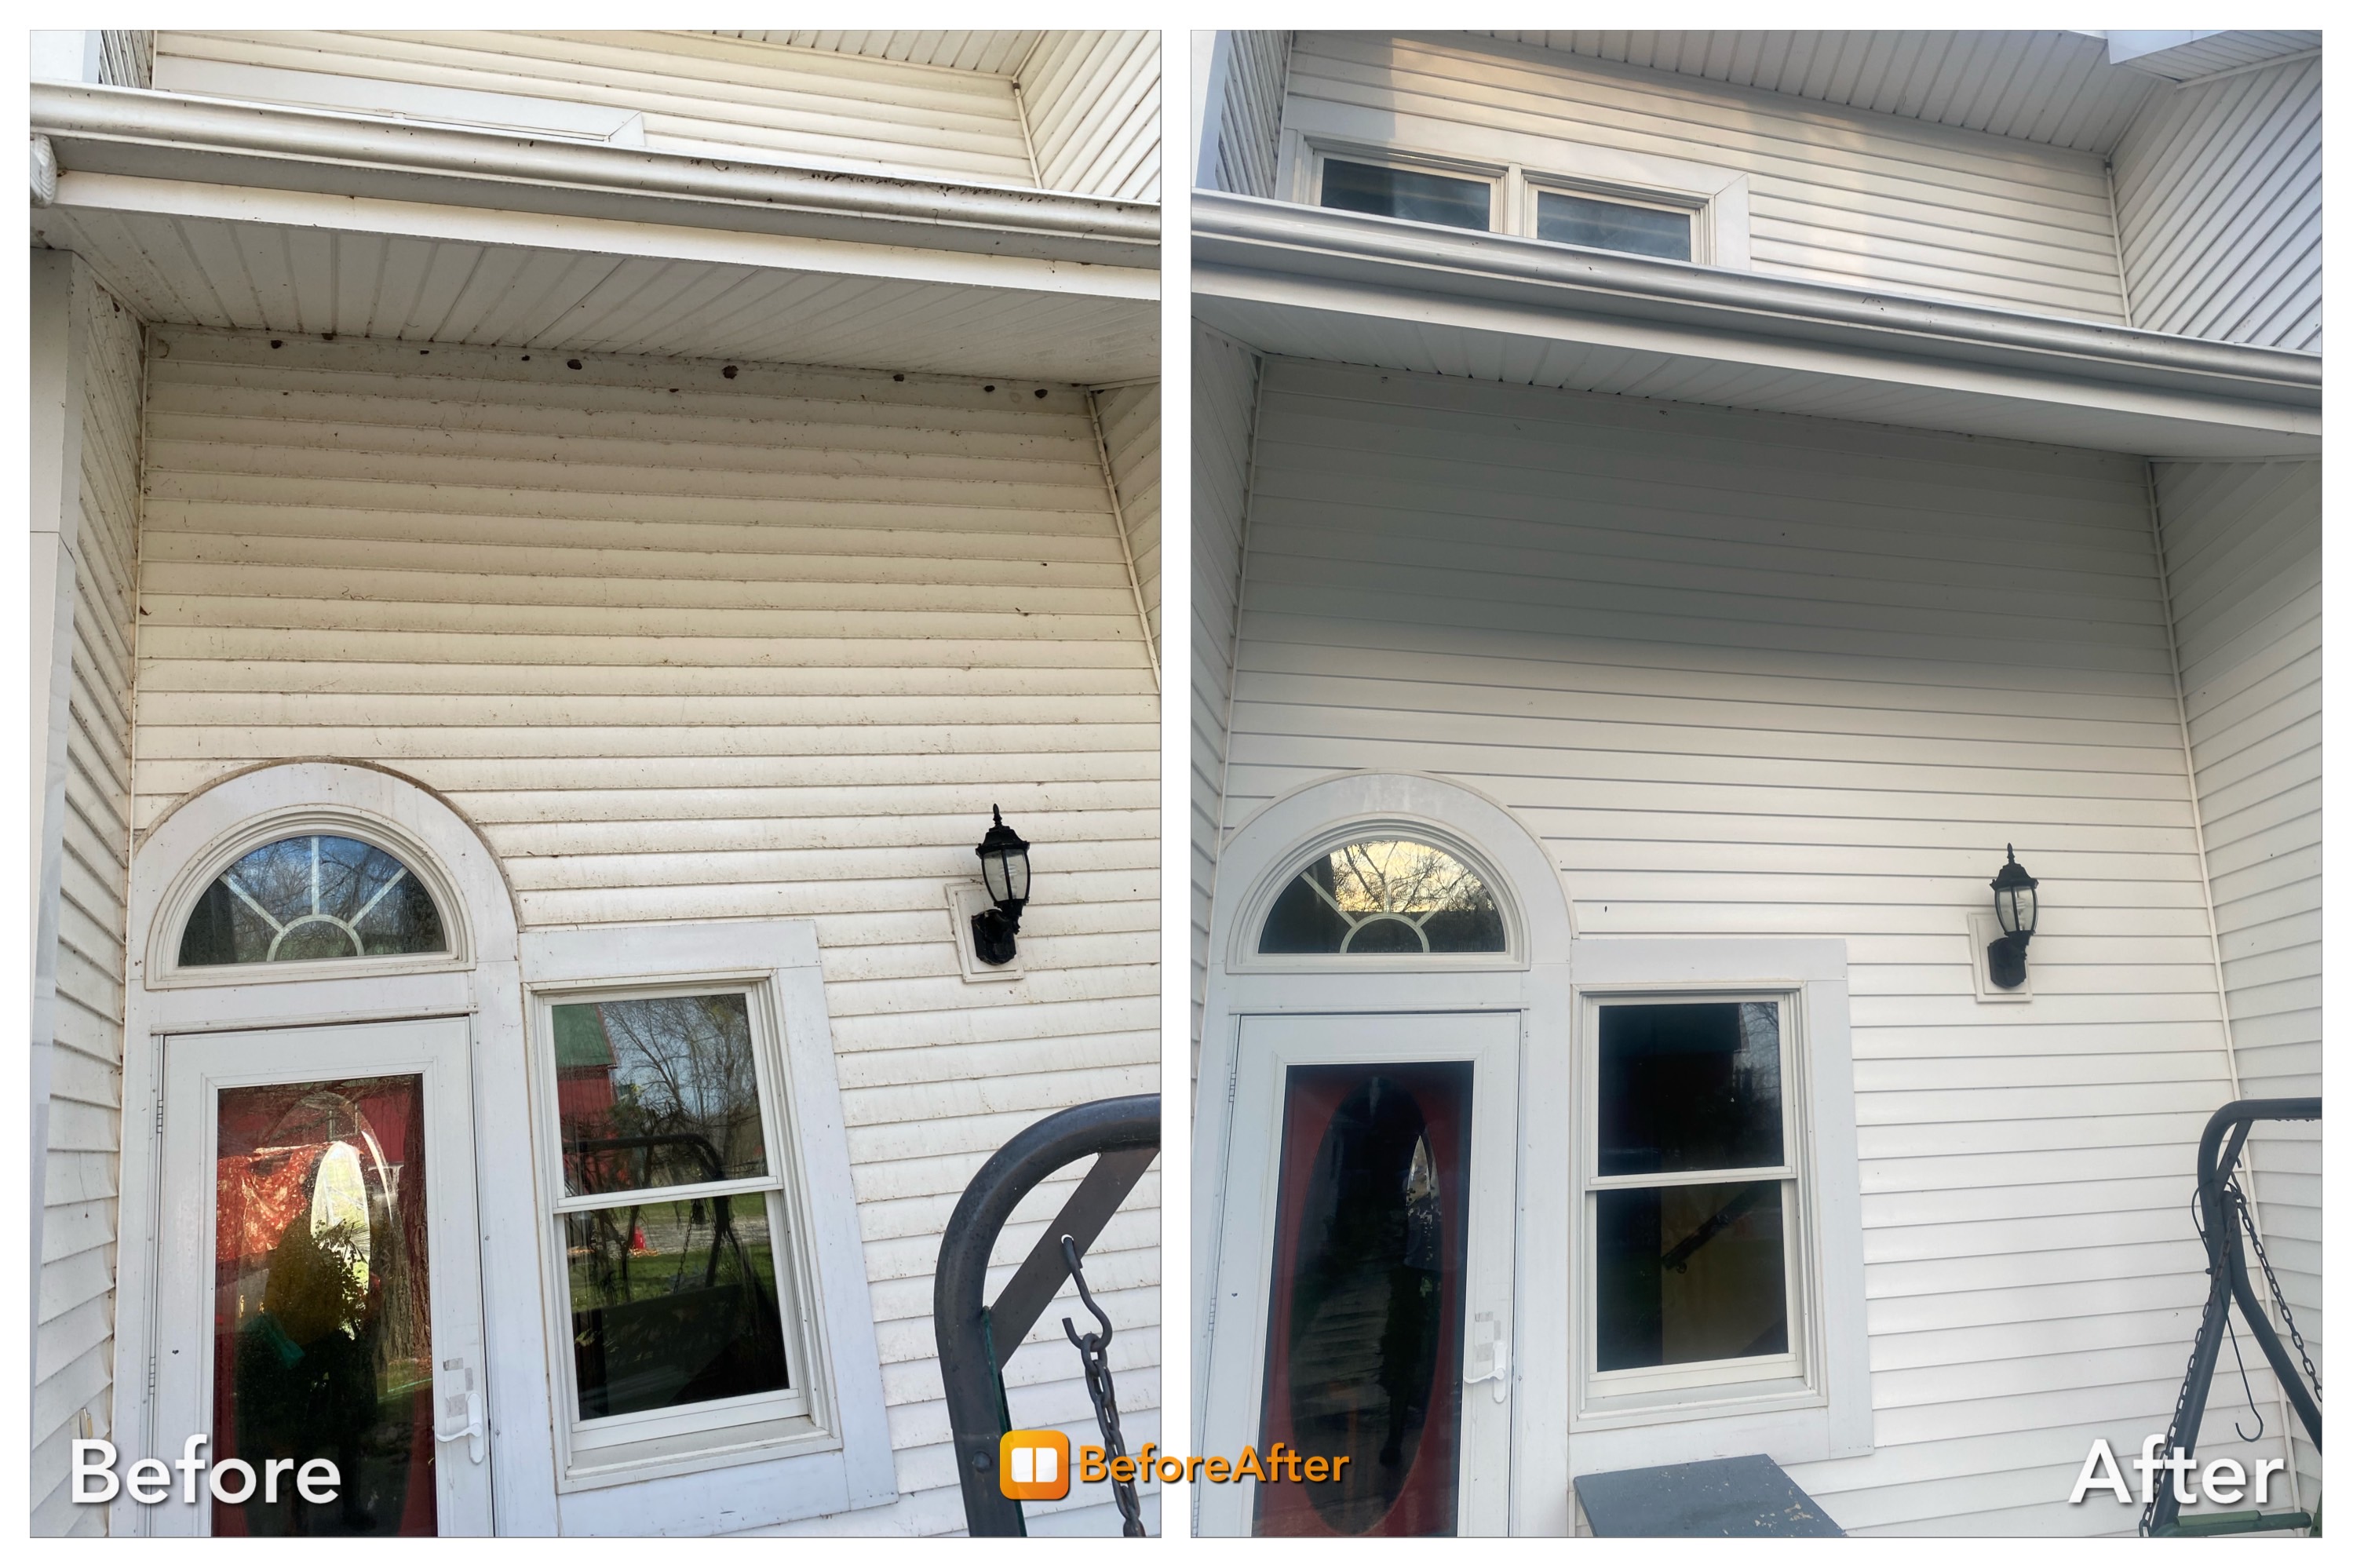 Cleaned House siding with visible algae growth and dirty eaves